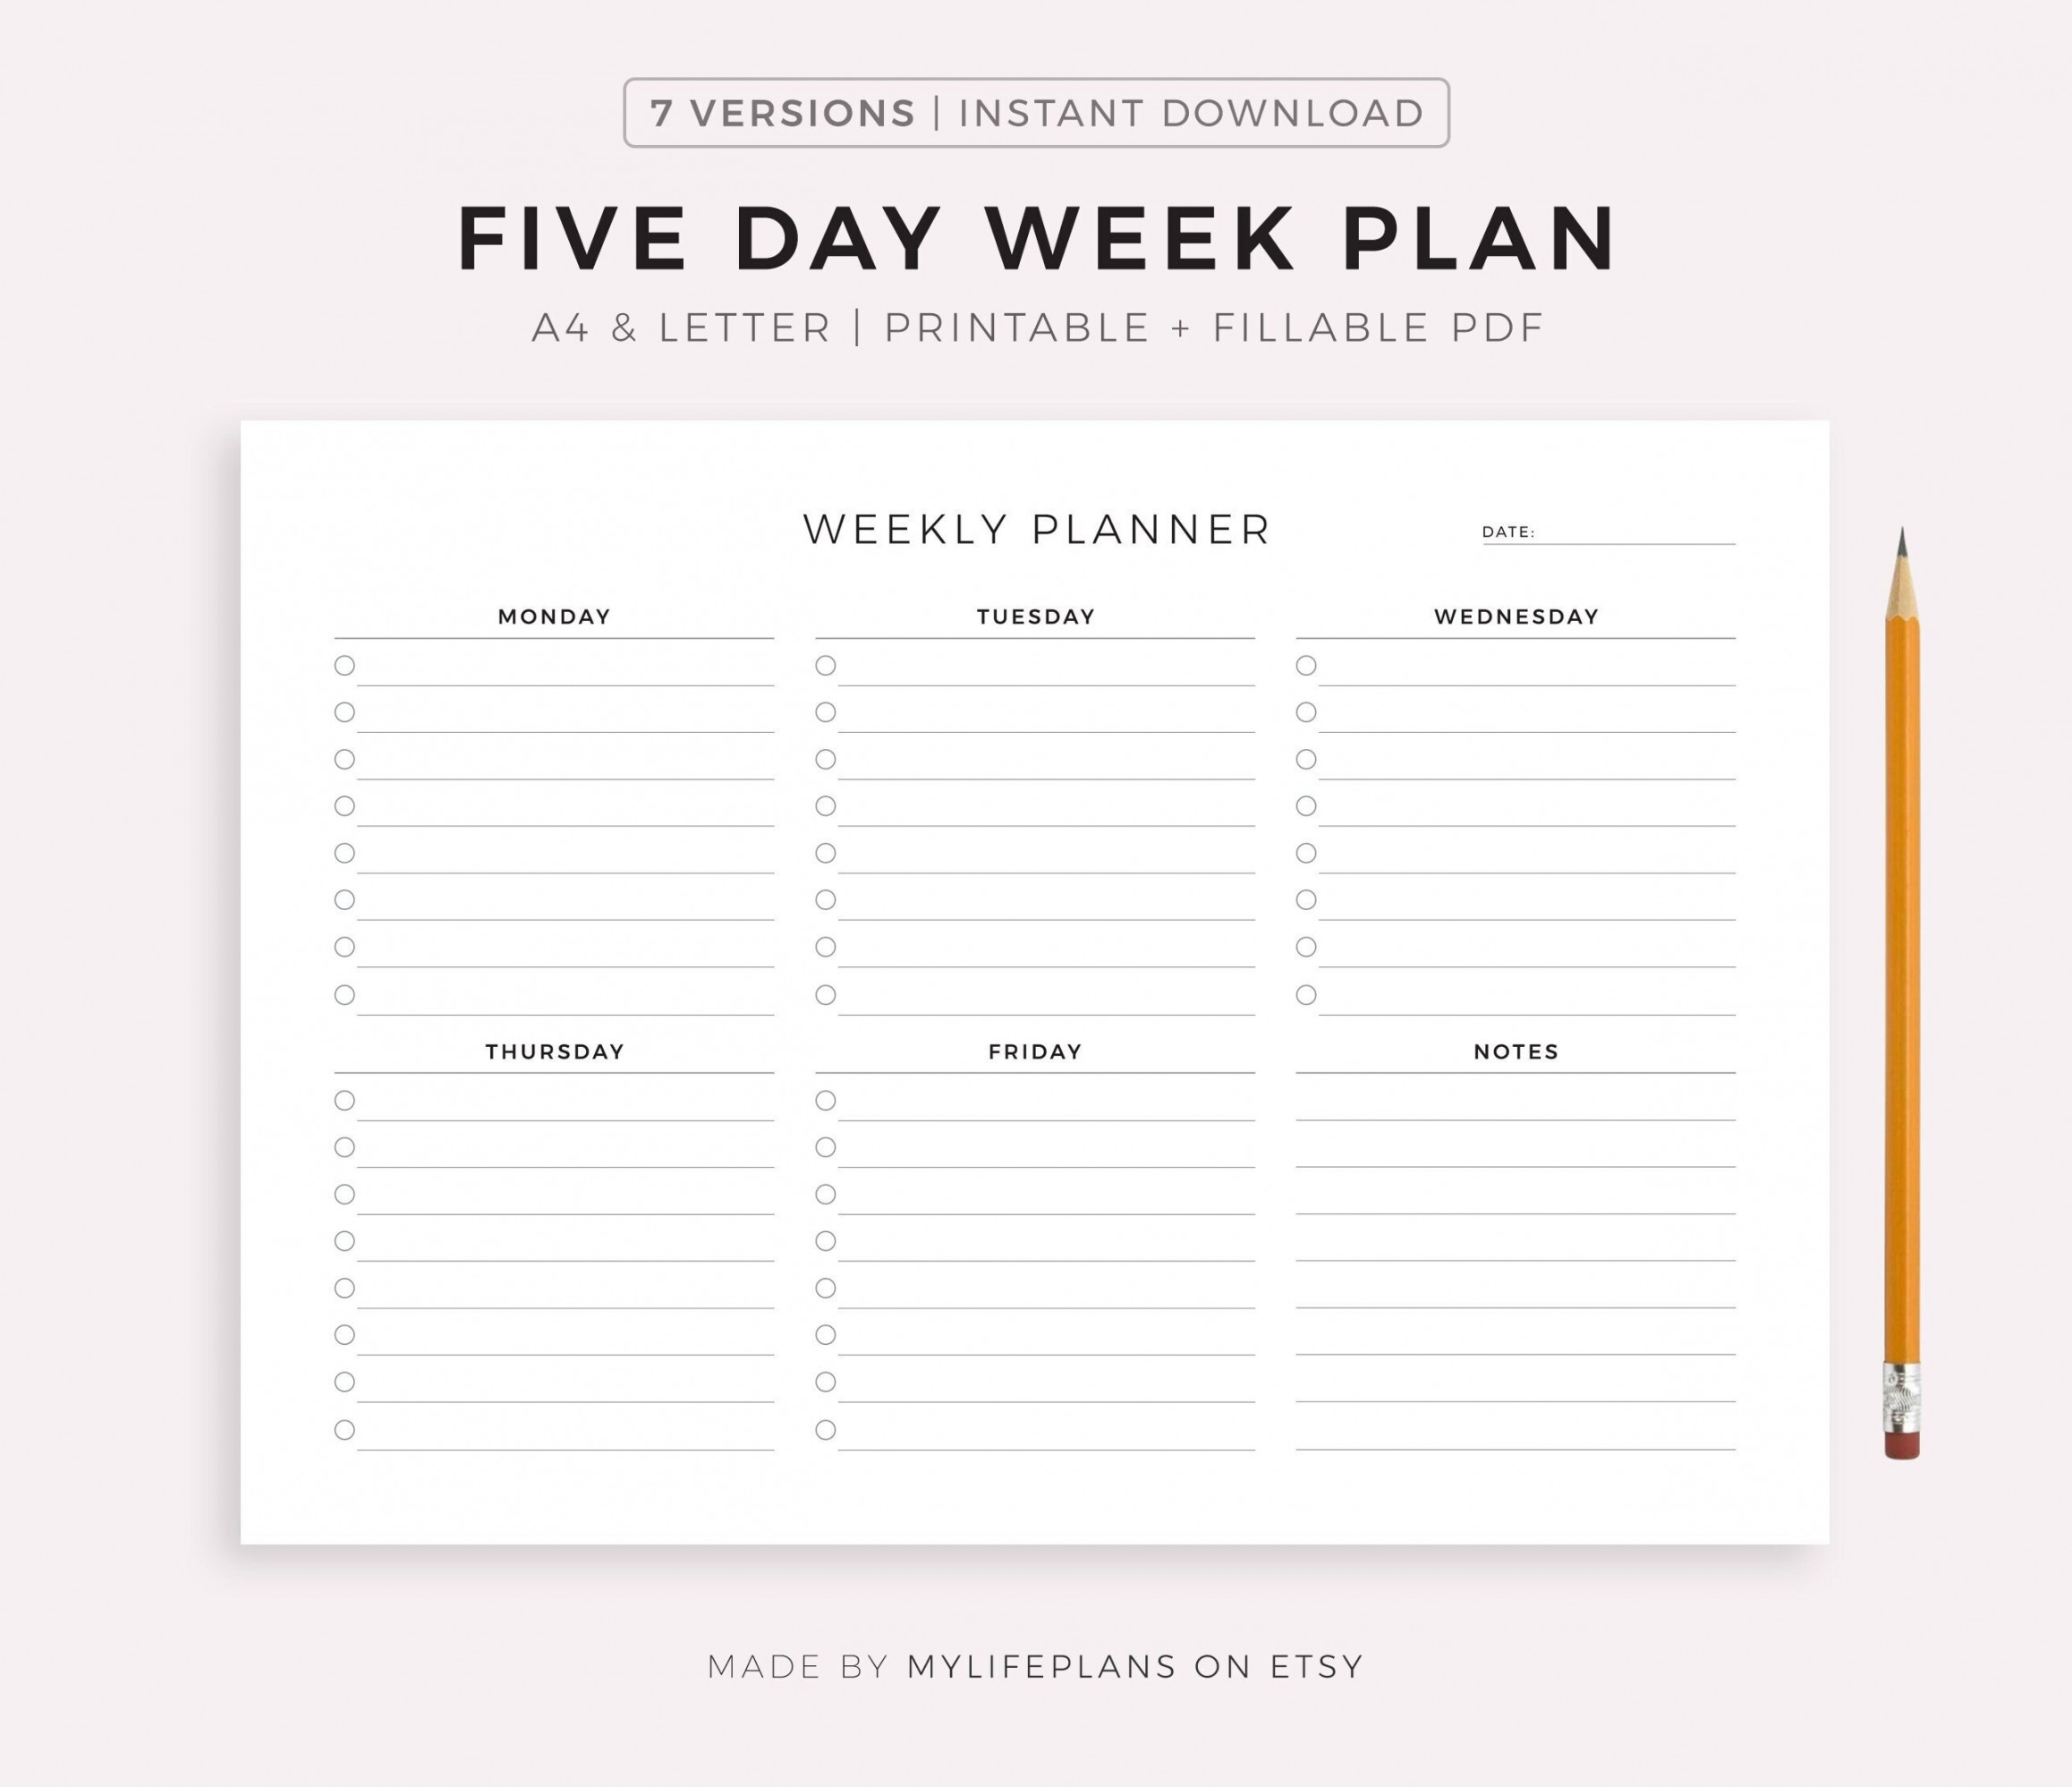 Five Day Weekly Planner Printable to Do List, Weekly Schedule